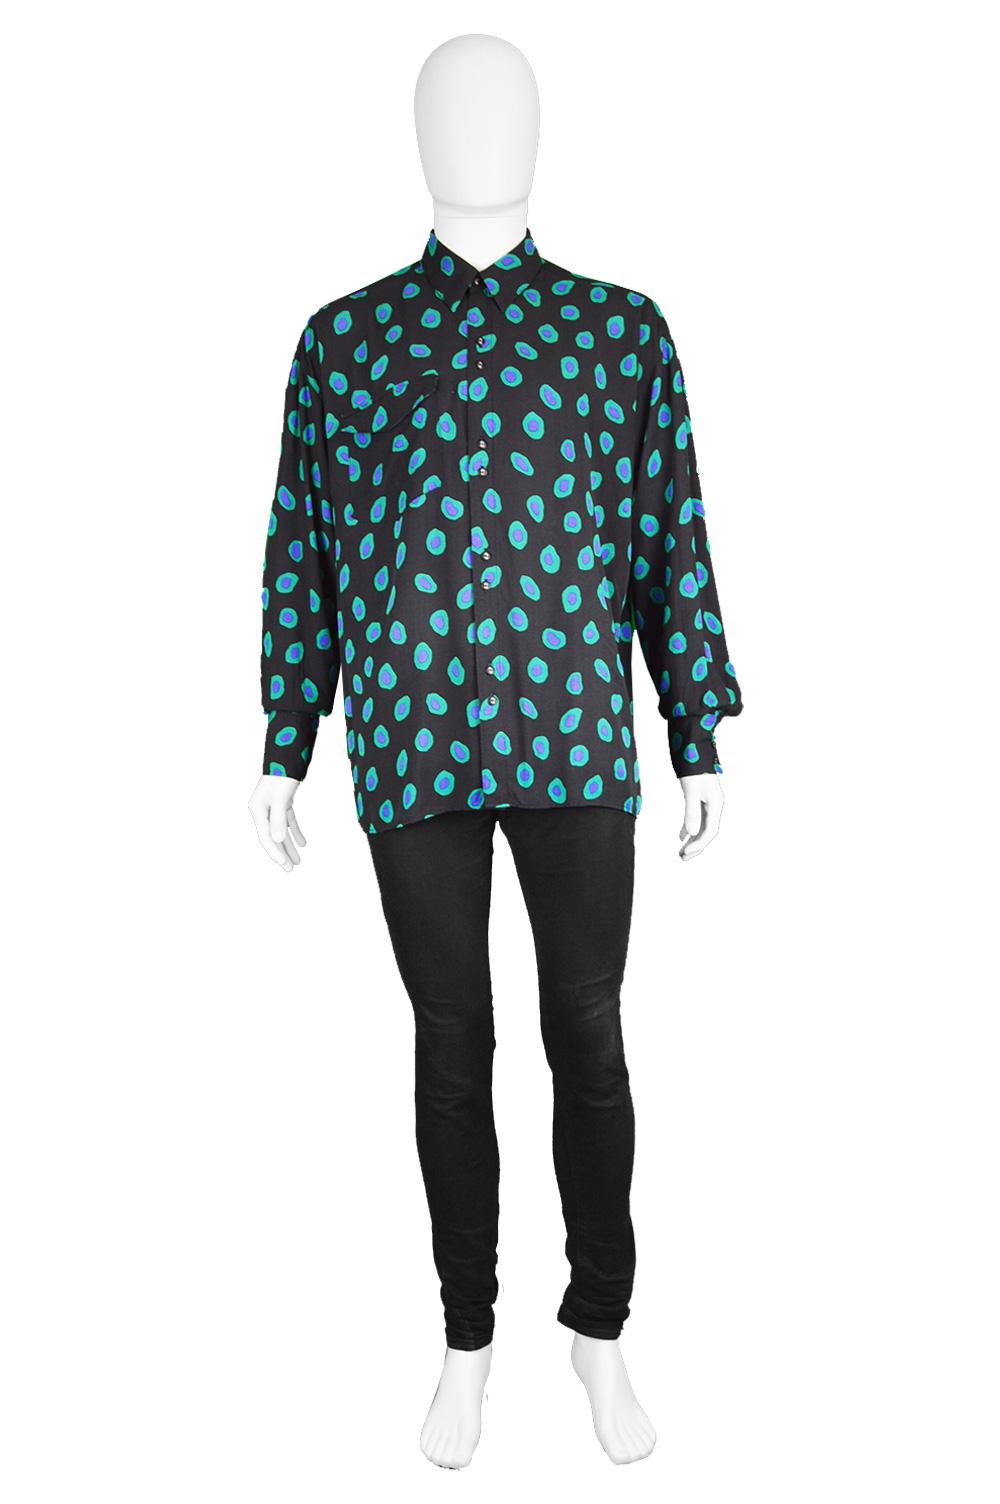 Christopher New Vintage Men's Long Sleeve Black & Green Rayon Shirt, 1990s

Click 'CONTINUE READING' below for Size & Description.

Size: Marked M but this gives a loose, oversized fit as pictured. Please check measurements. 
Chest - 50” /